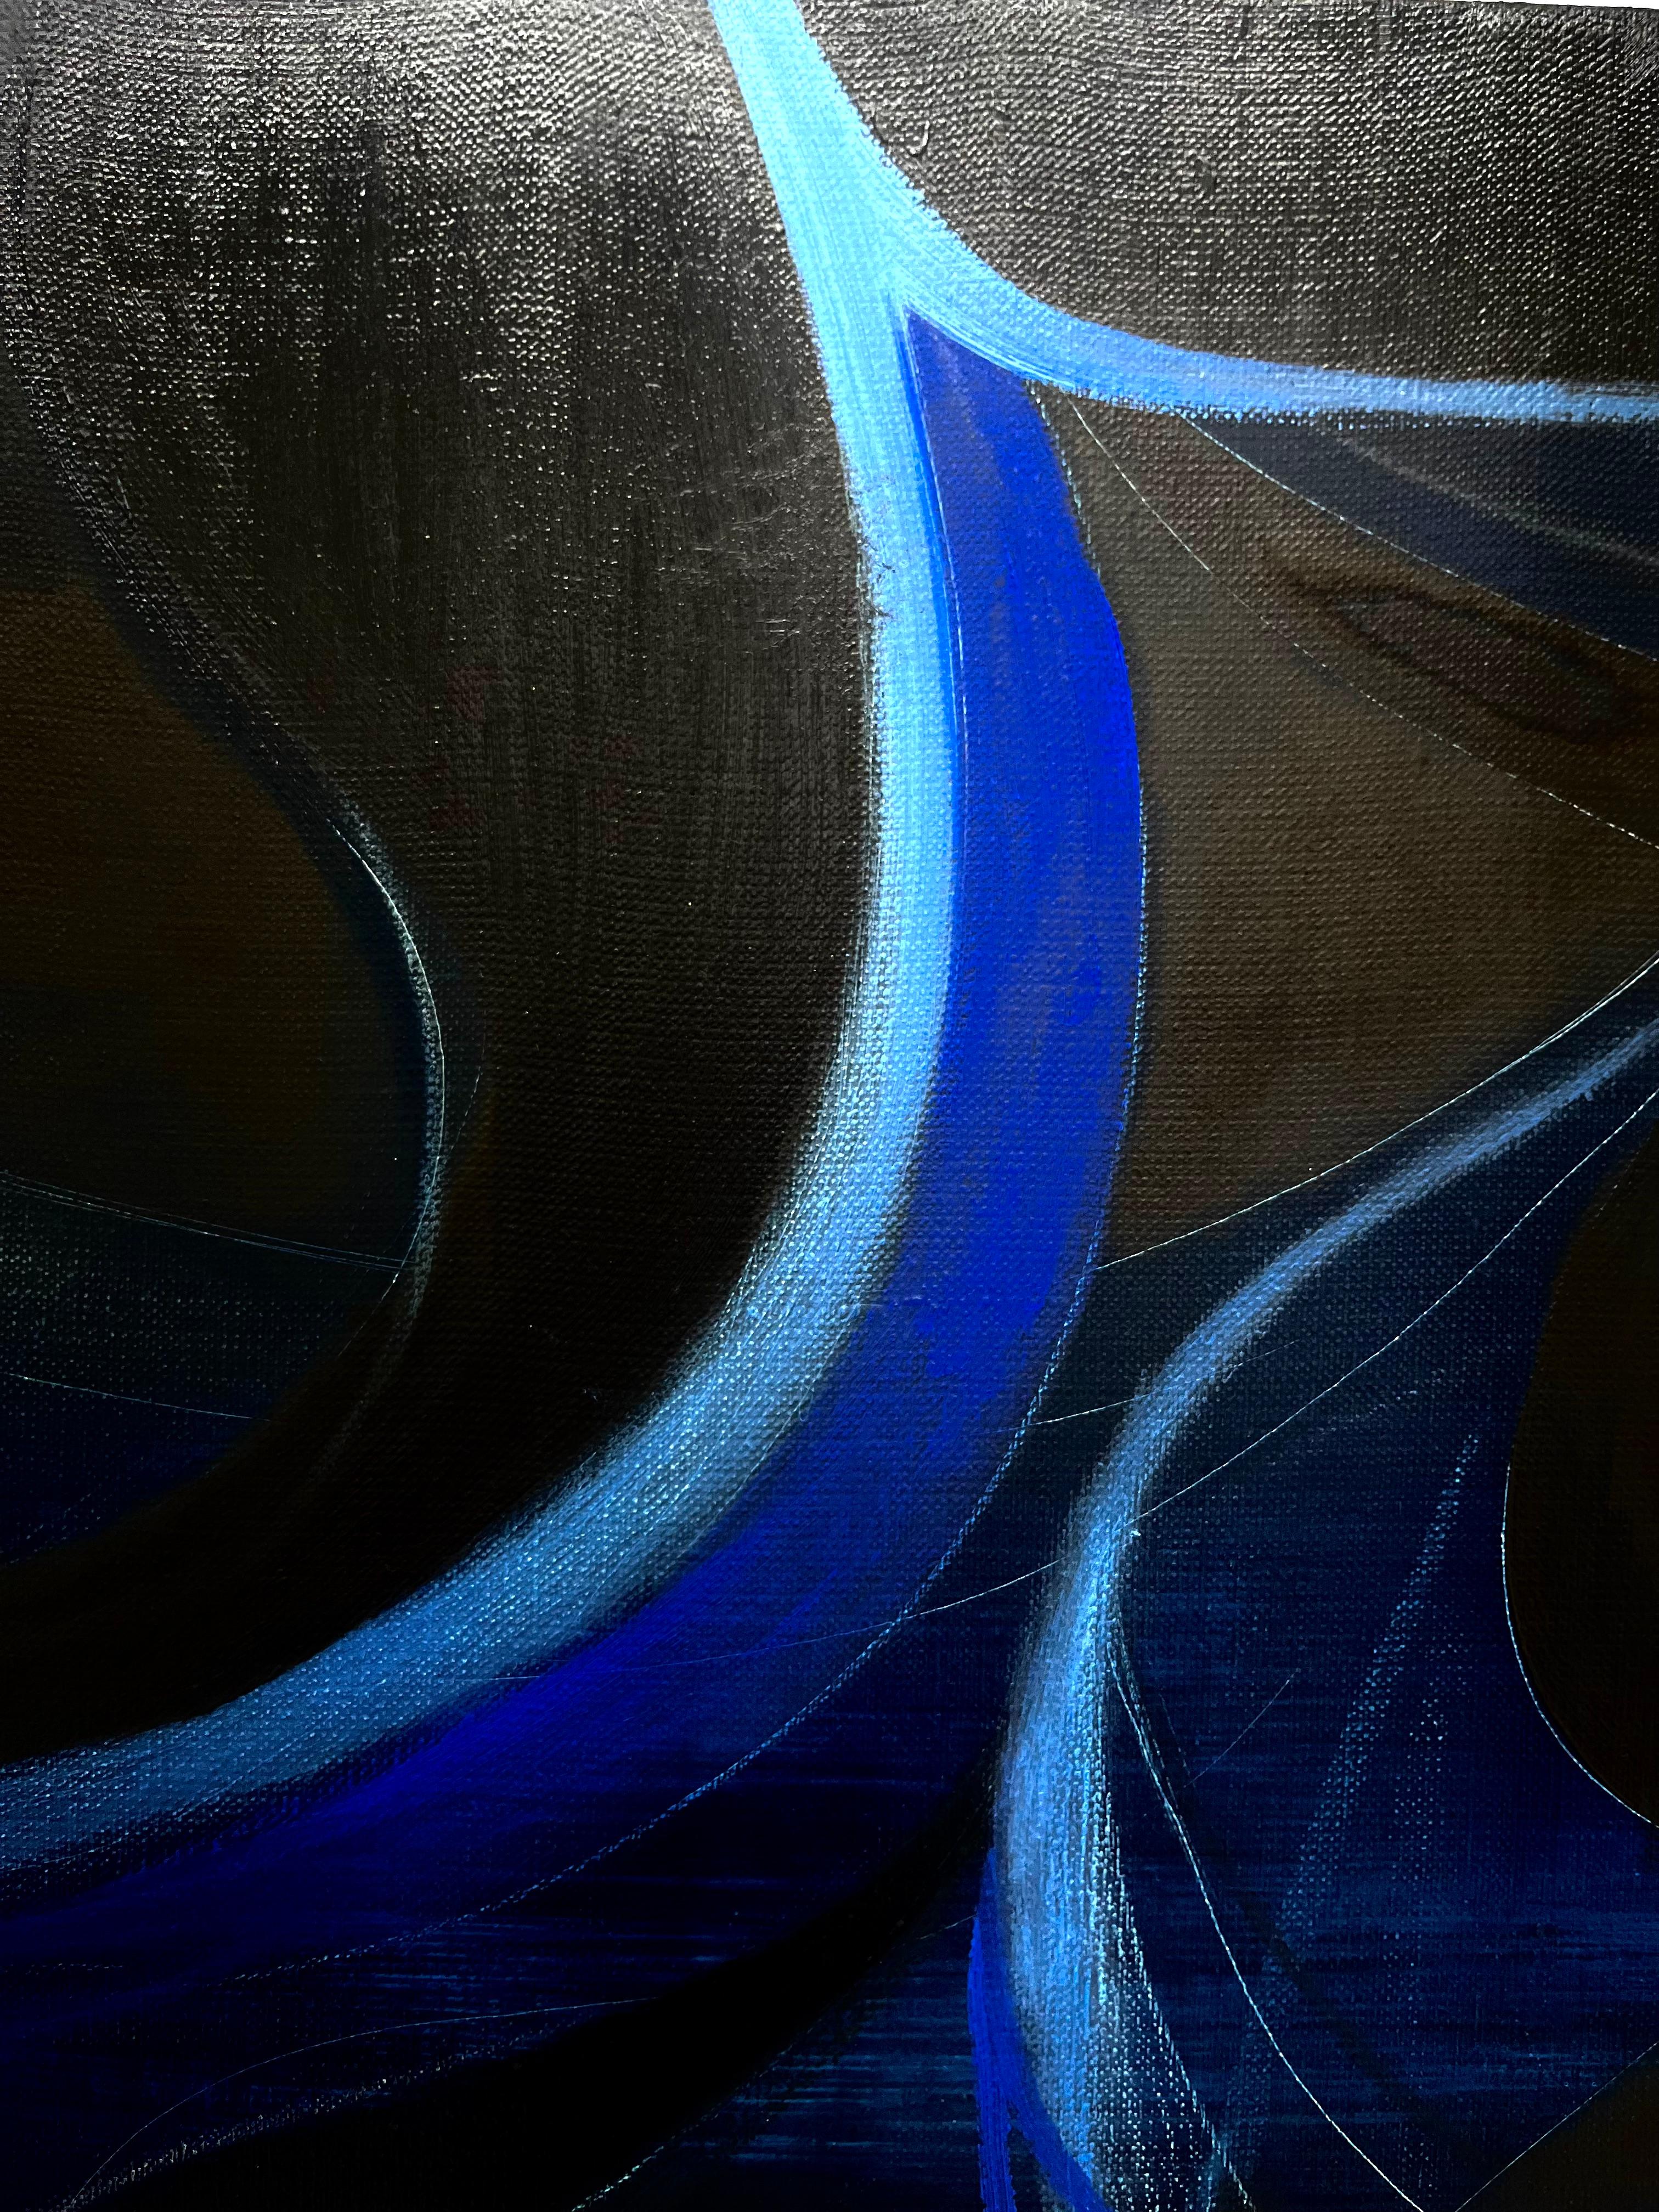 Untitled - organic, oil painting, blue and black, layered, took 1 year to dry - Contemporary Painting by Nicolás Guzmán